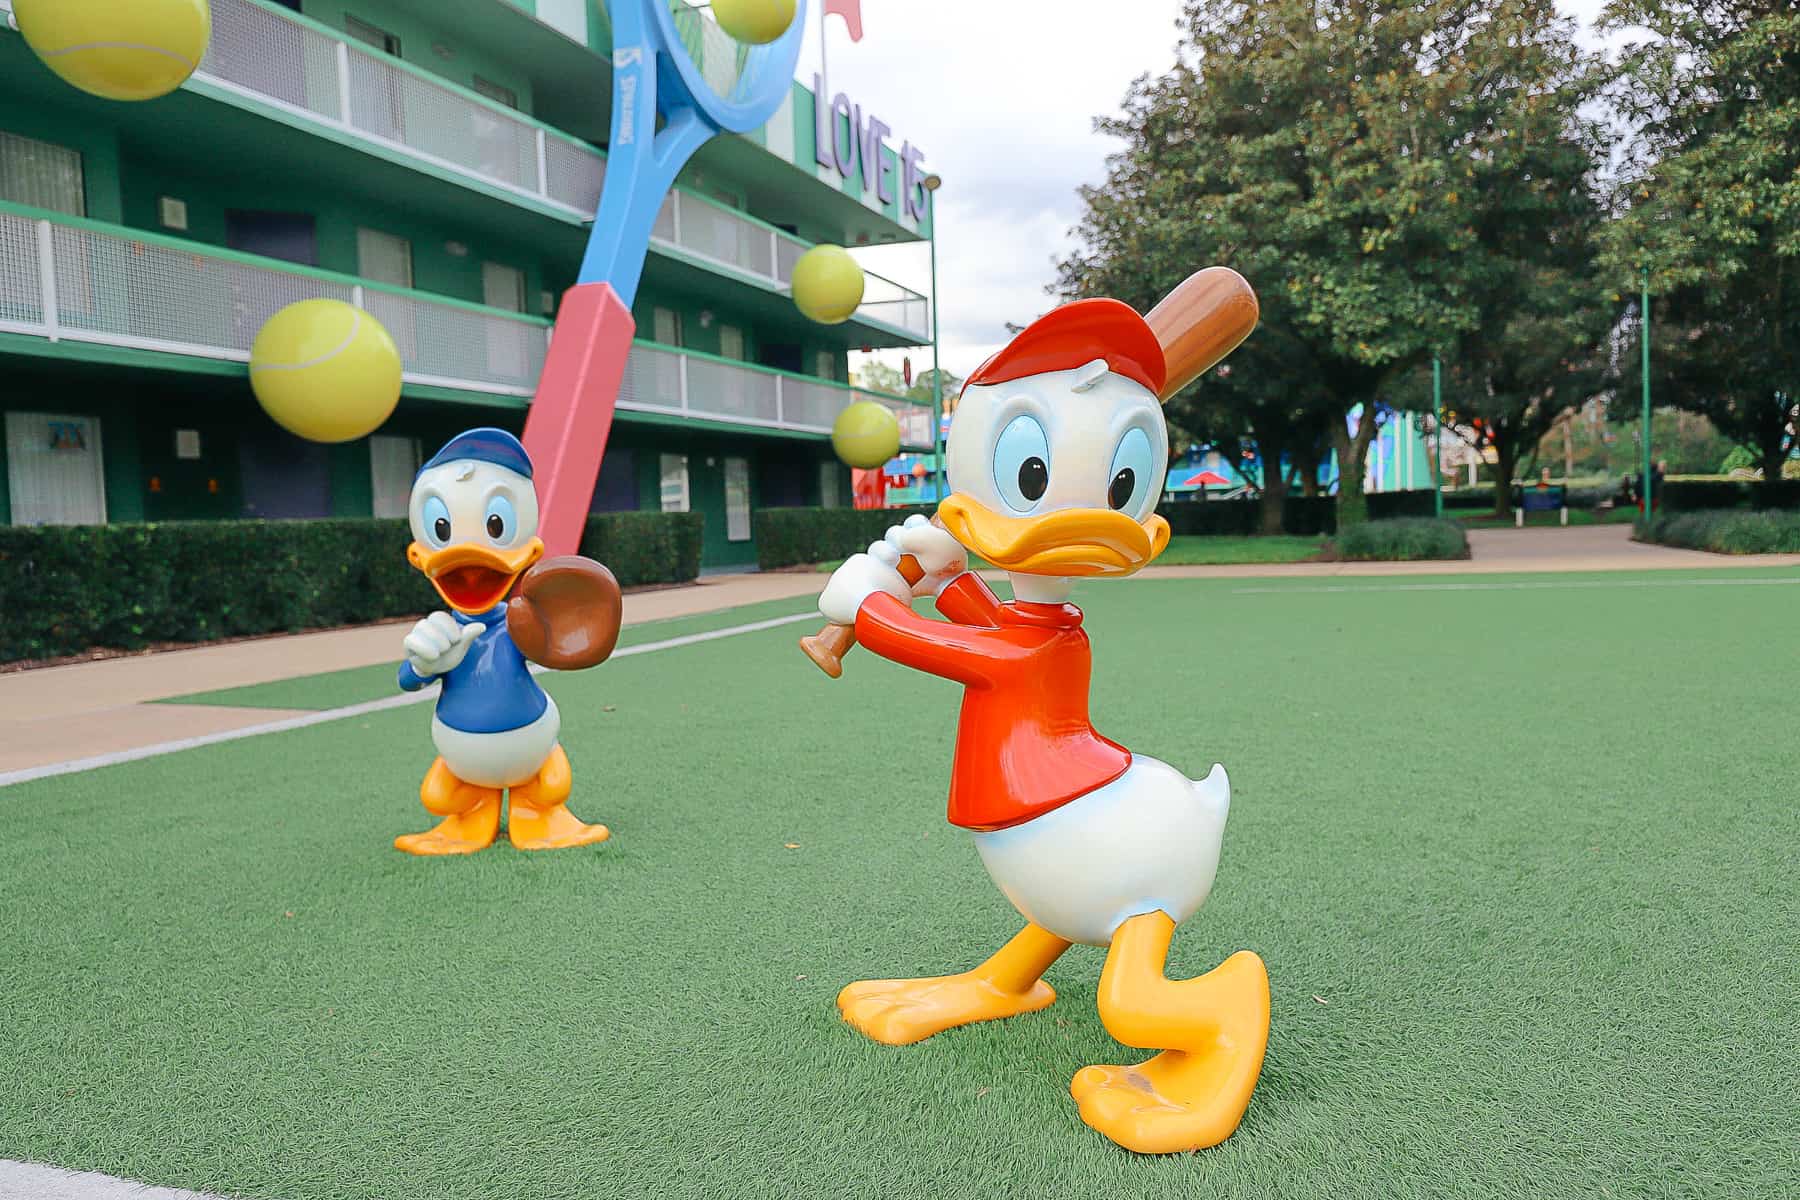 Donald's nephews playing baseball on the tennis courtyard at All-Star Sports